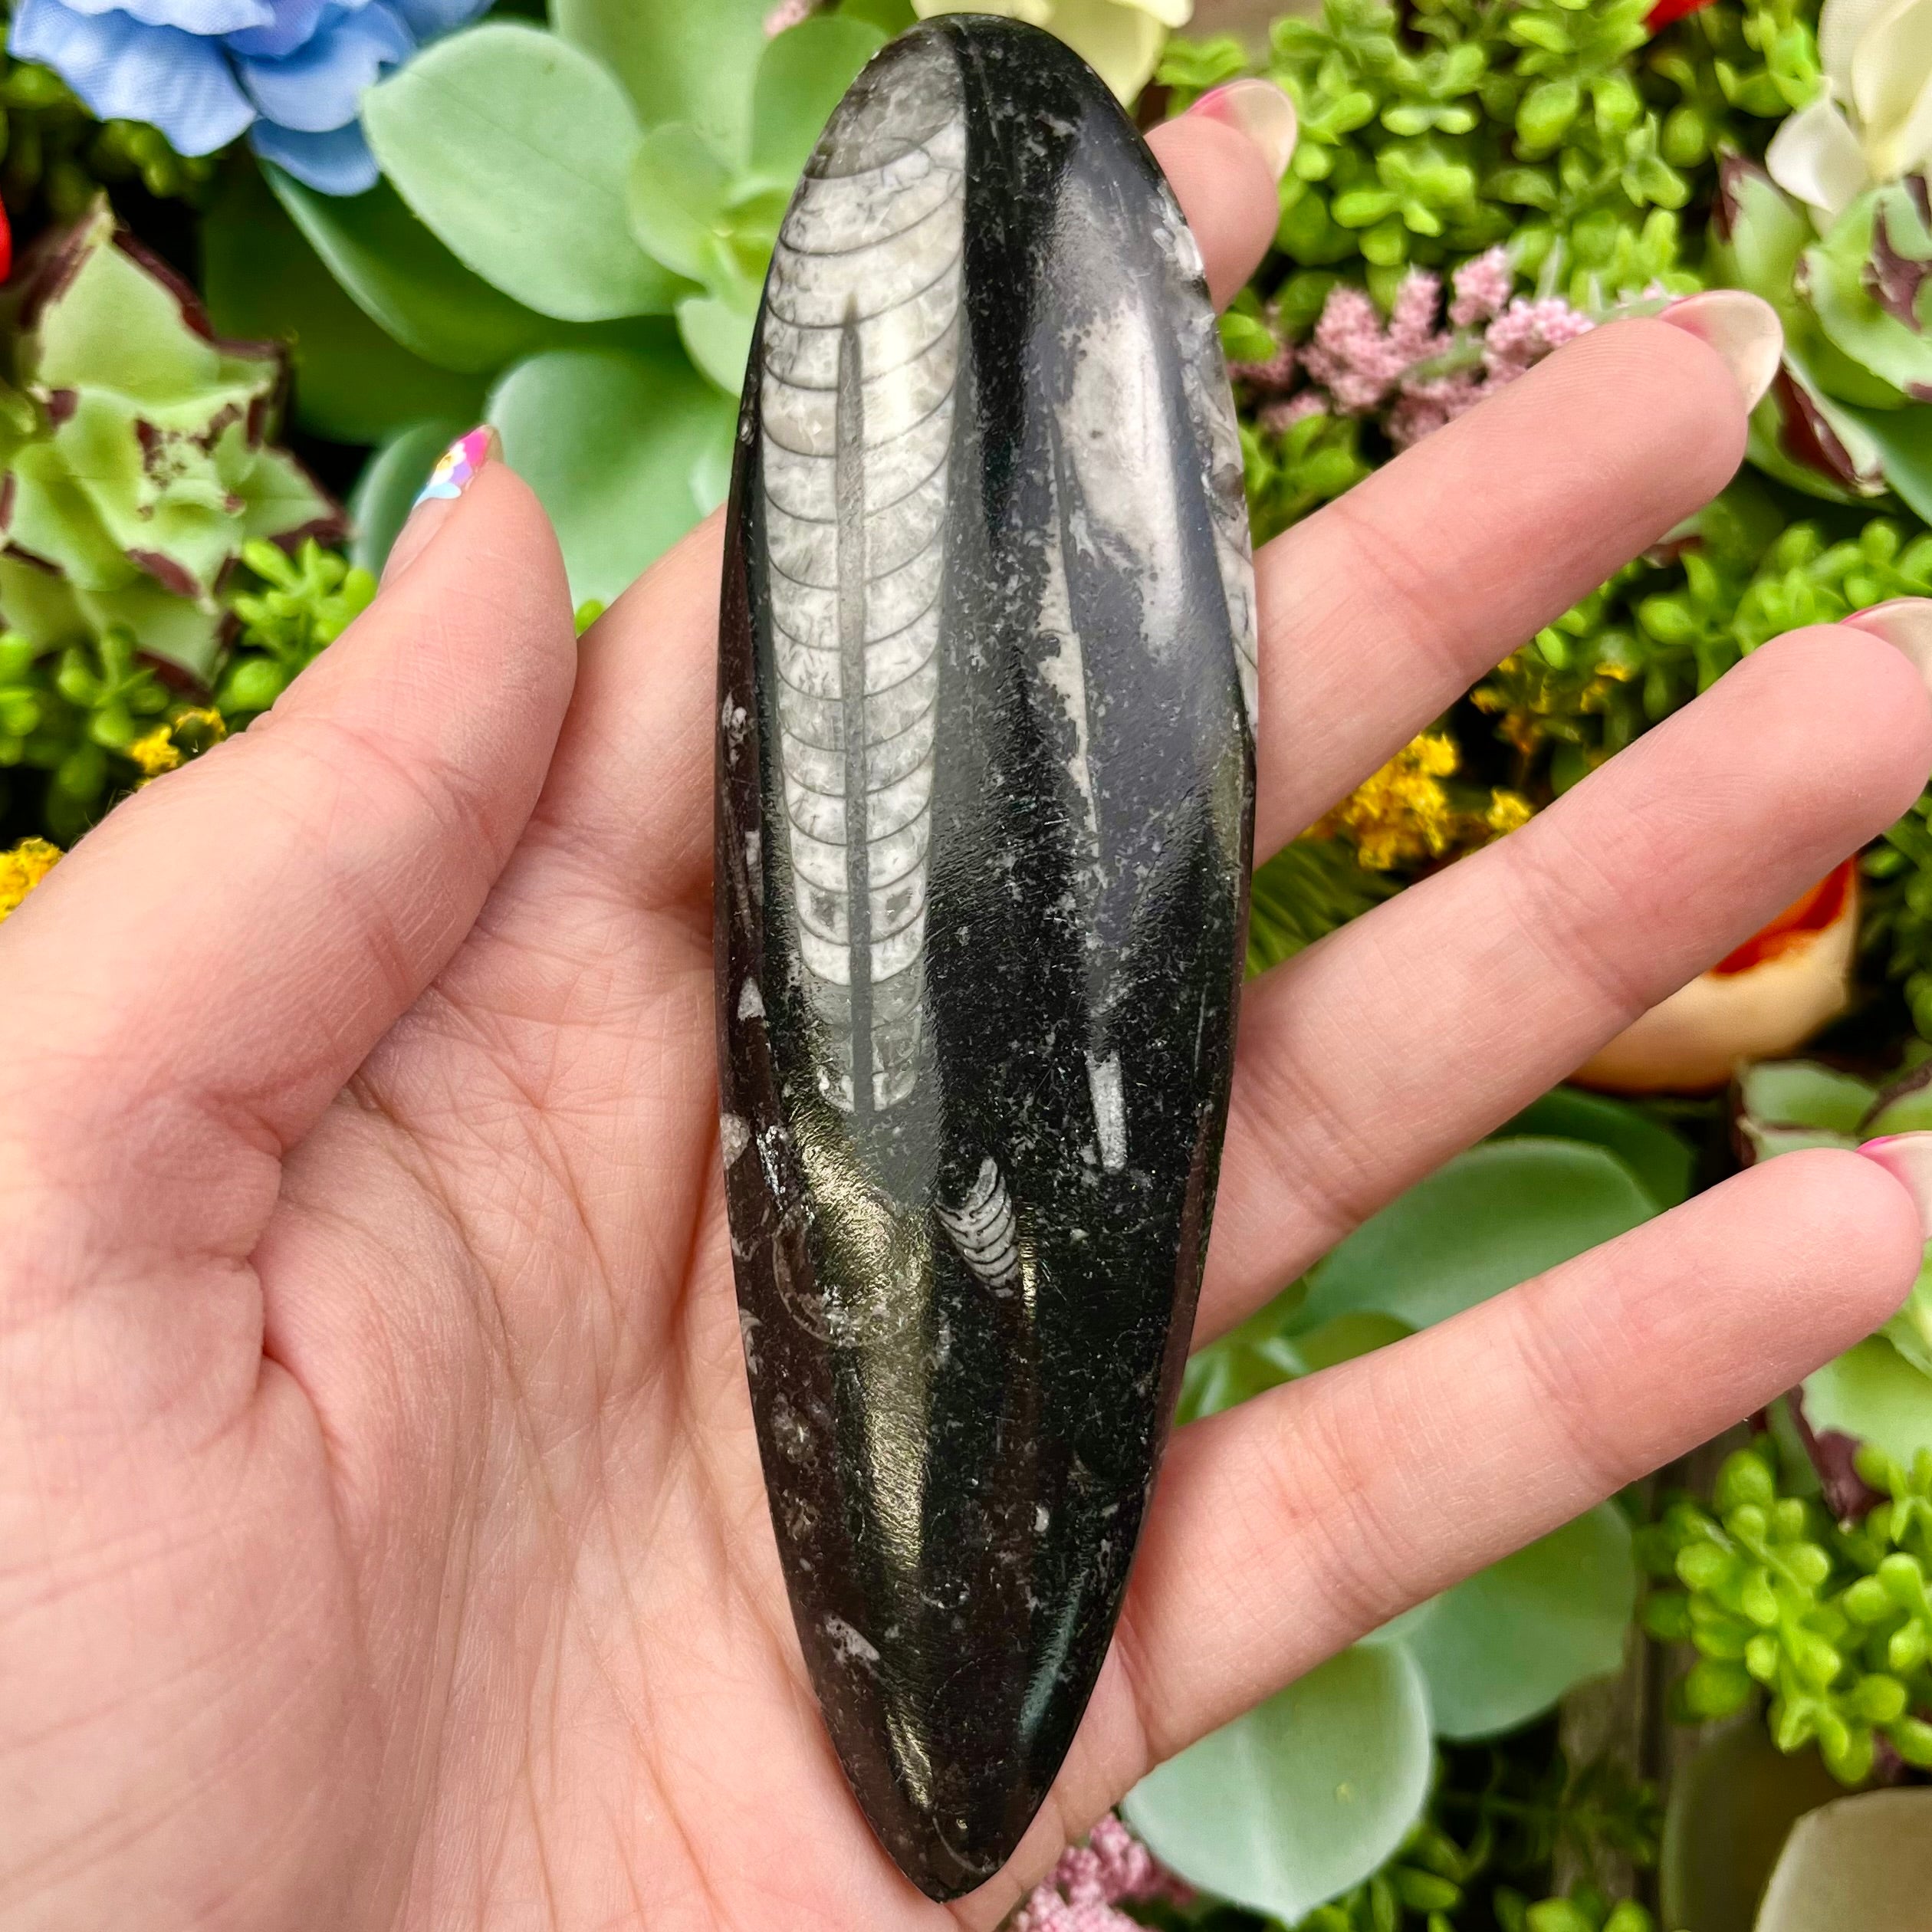 4.75 Inch Orthoceras Fossil P13